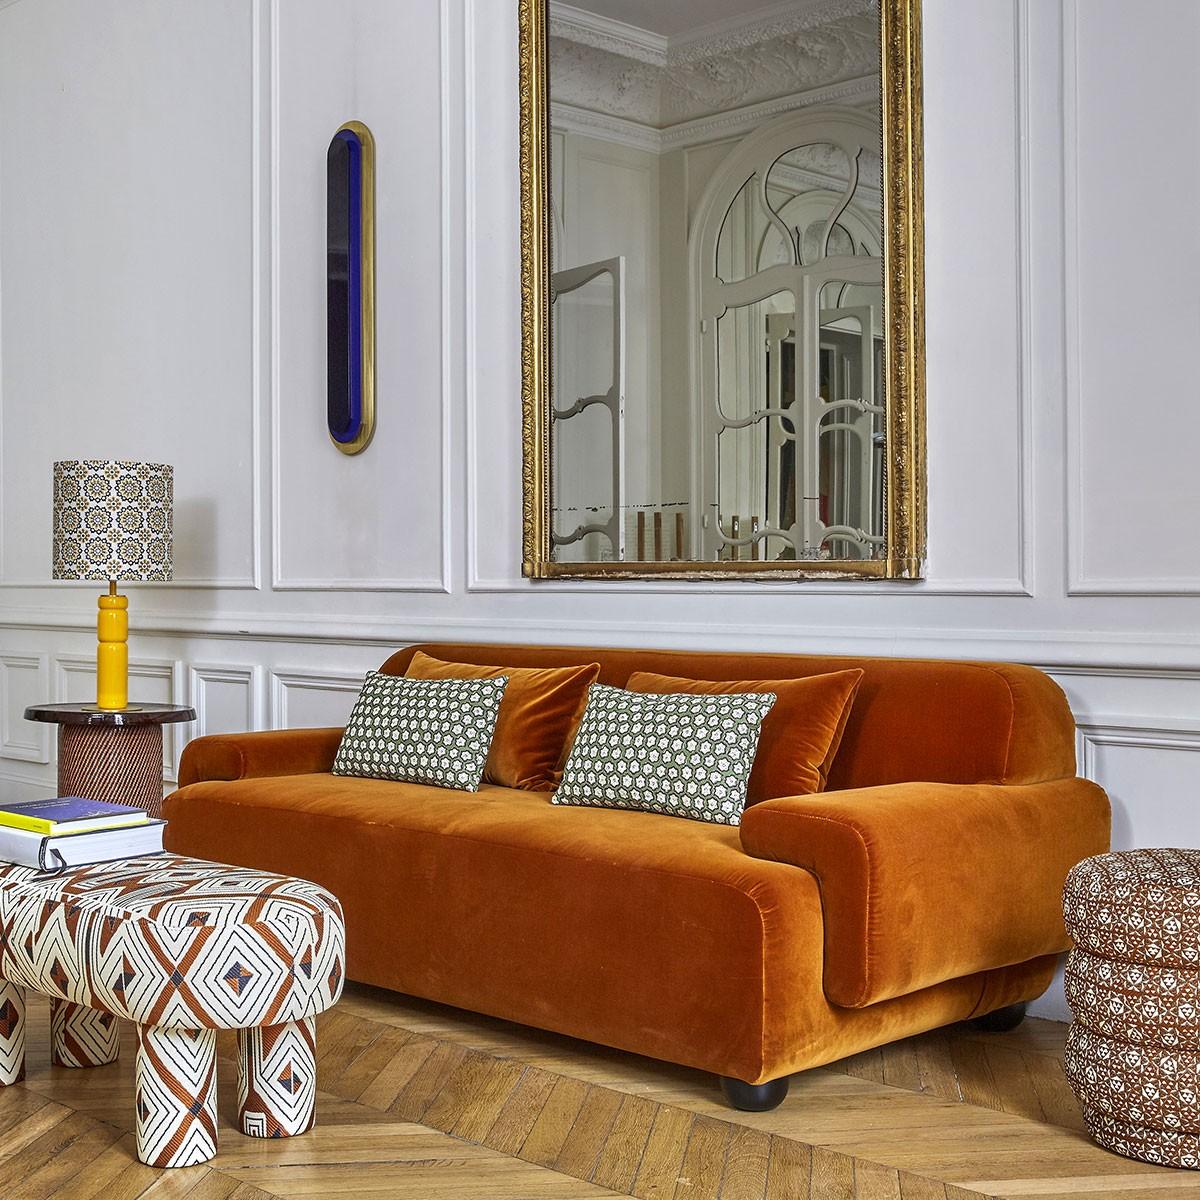 Popus Editions Lena 4 Seater Sofa in Brown Como Velvet Upholstery

It looks like it's straight out of a movie, with its generous curves and wide armrests. It is a real invitation to spend long Sundays with the family, comfortably seated in front